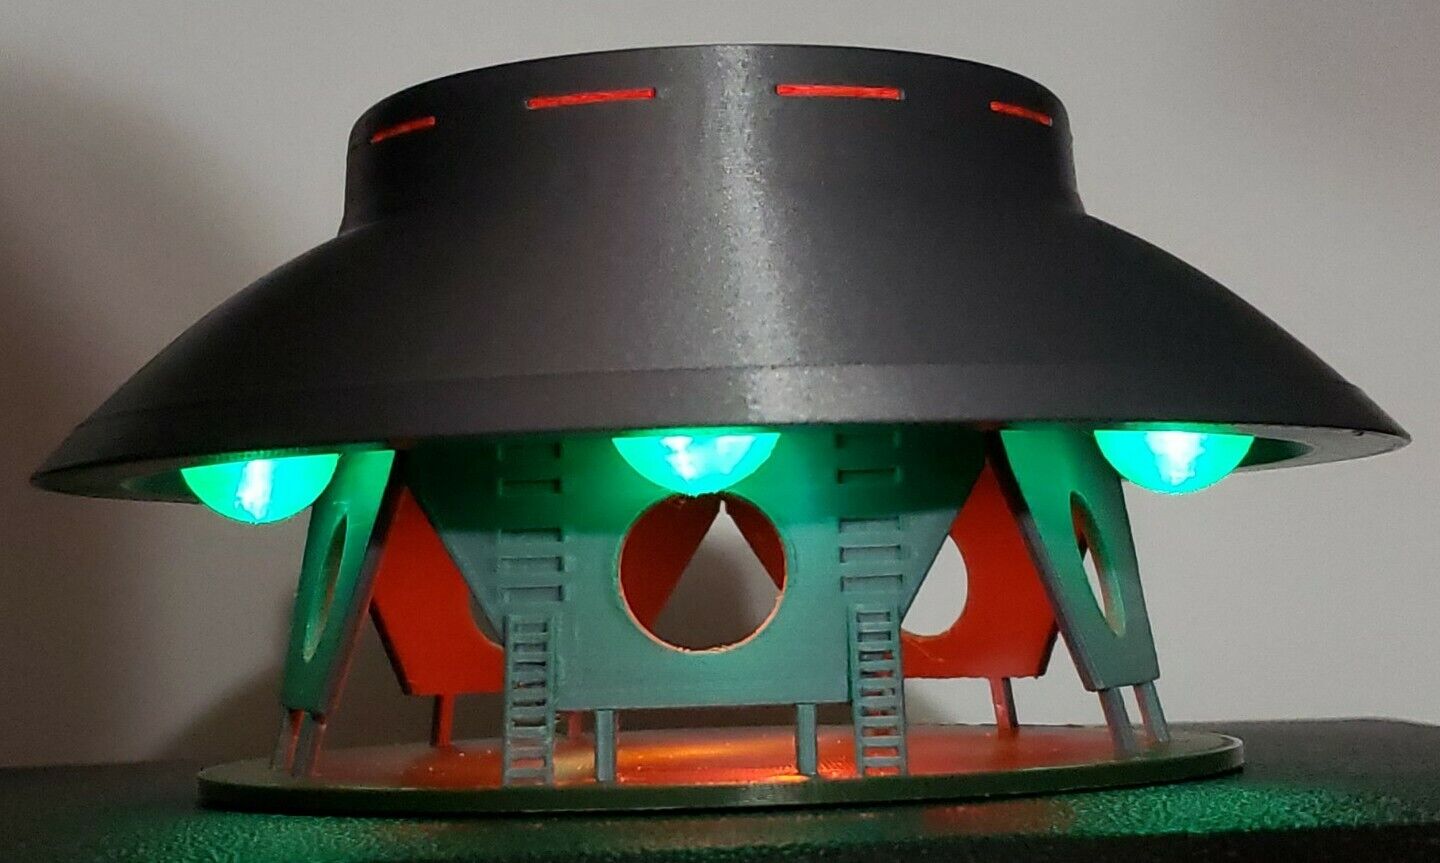 The Invaders UFO/Flying Saucer - Large - Landed With Stand & lights